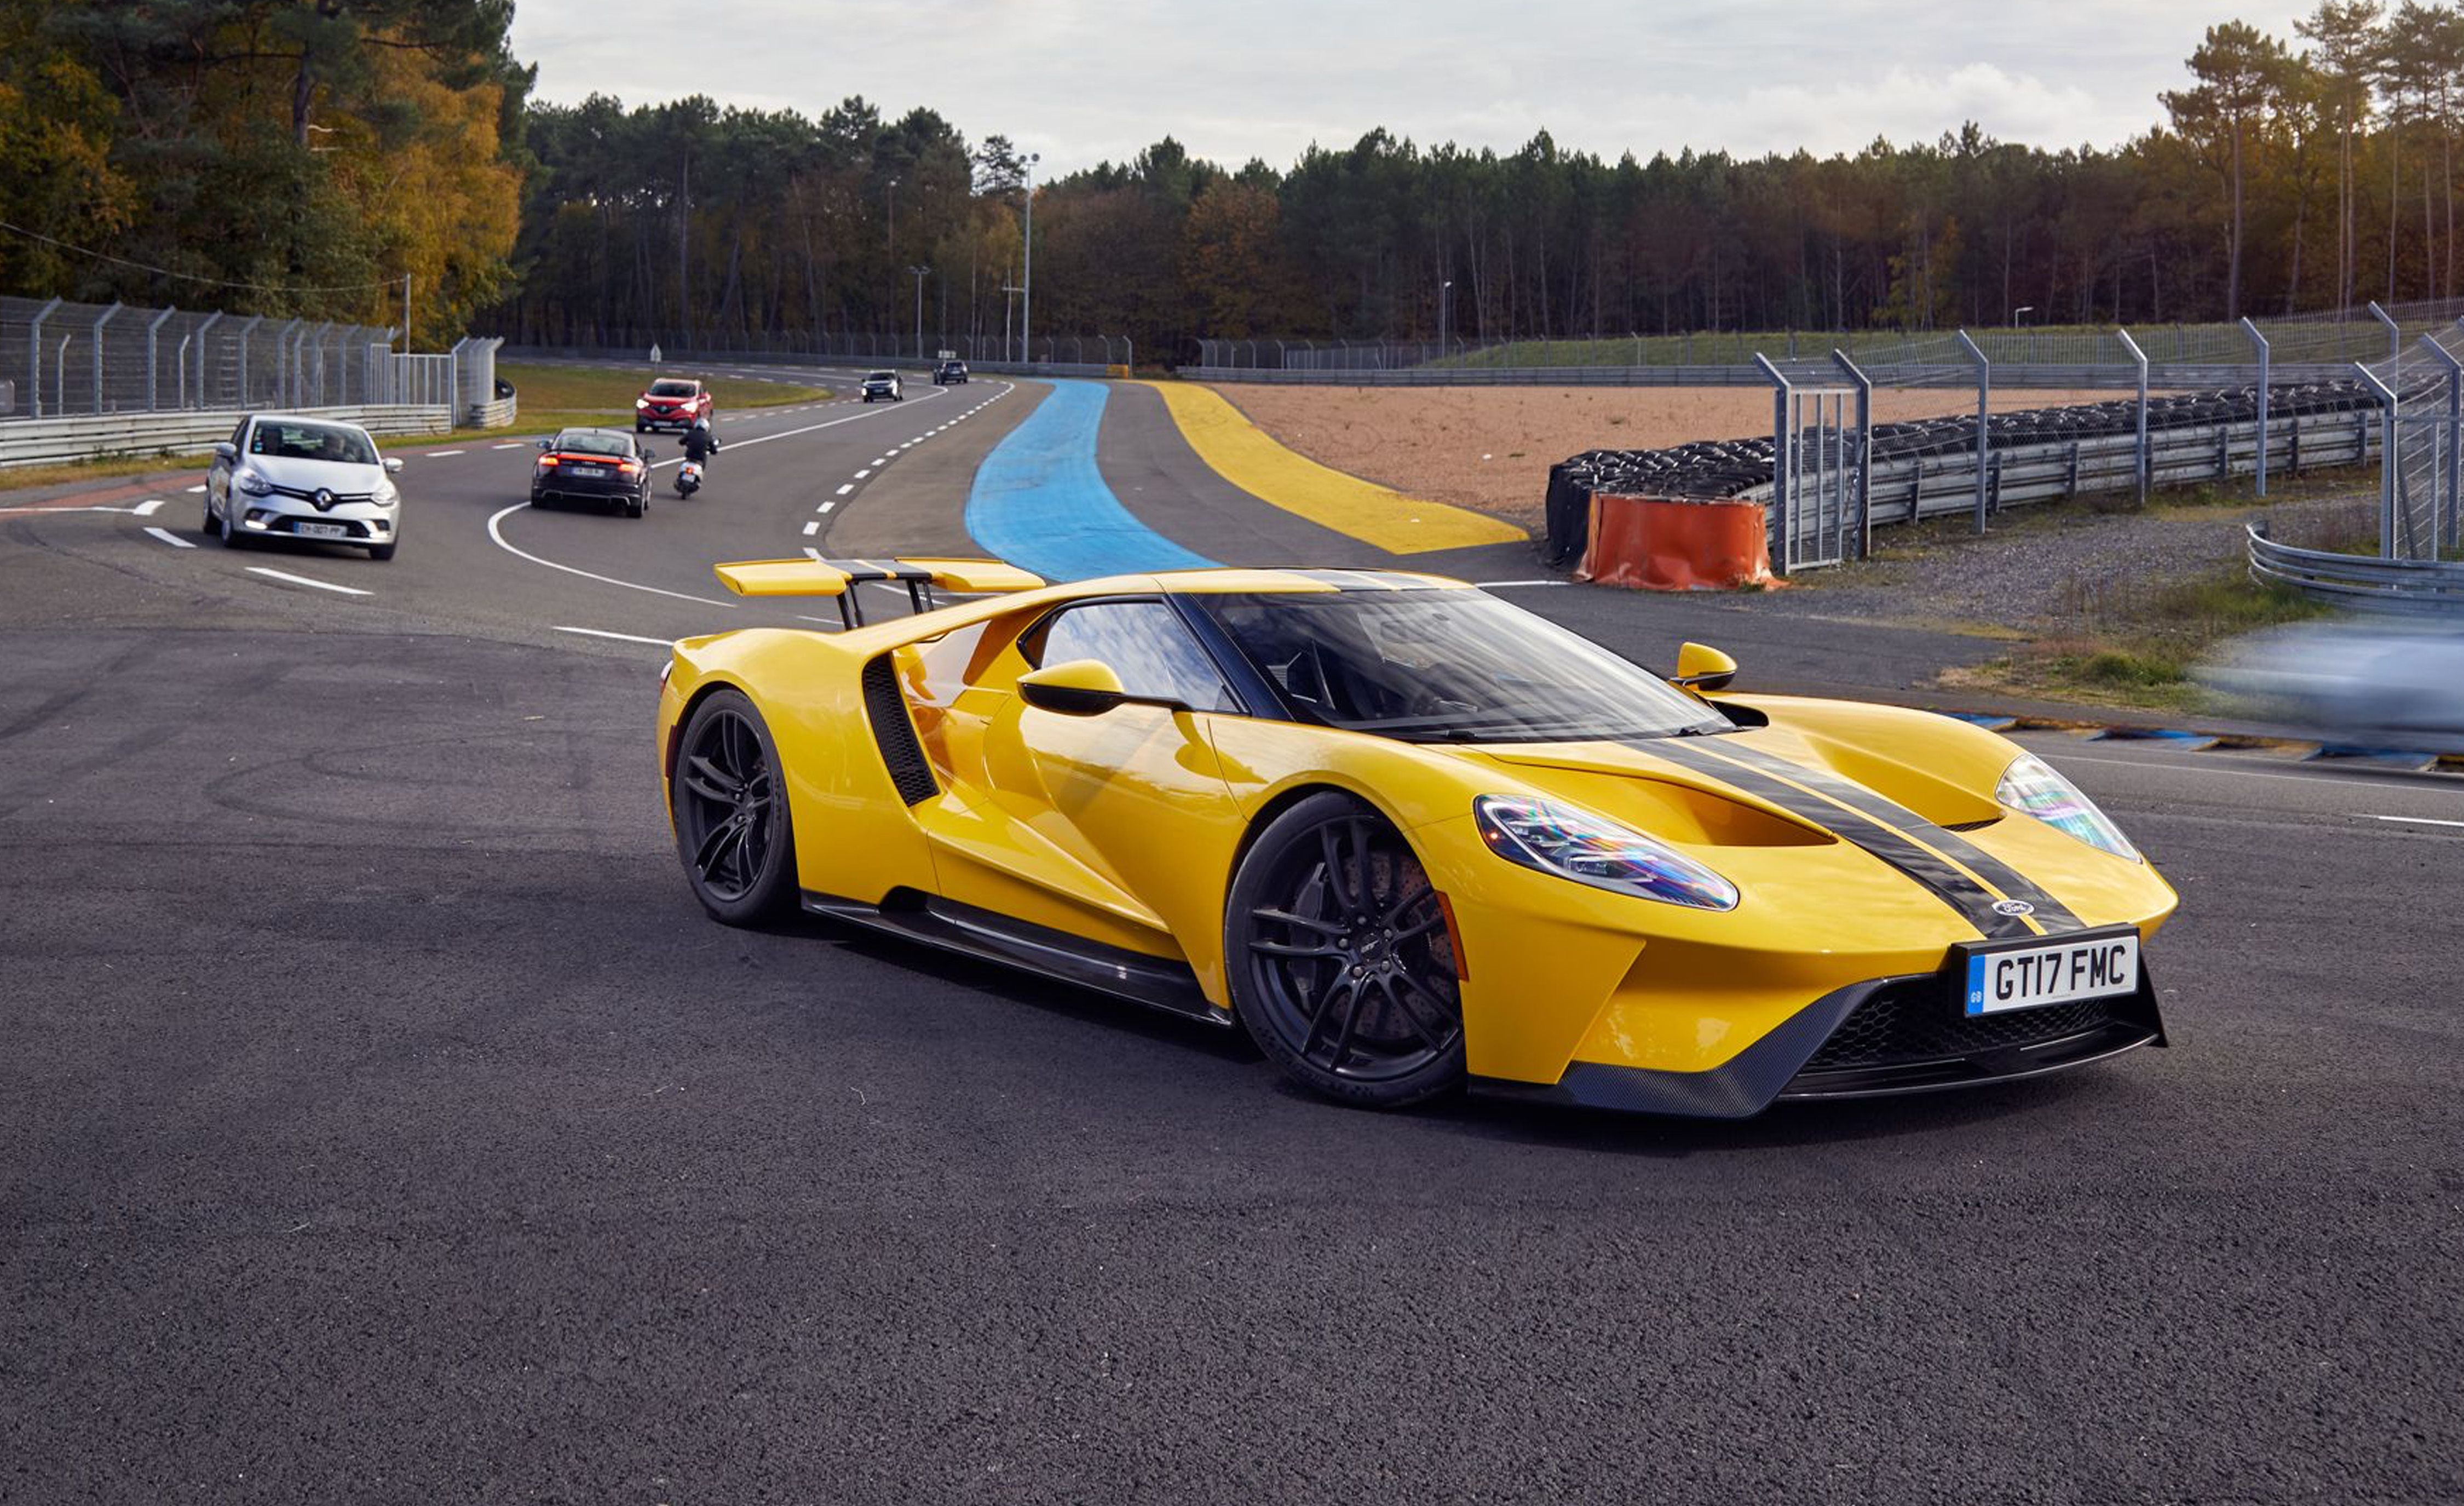 2019 Ford GT Reviews | Ford GT Price, Photos, and Specs | Car and Driver